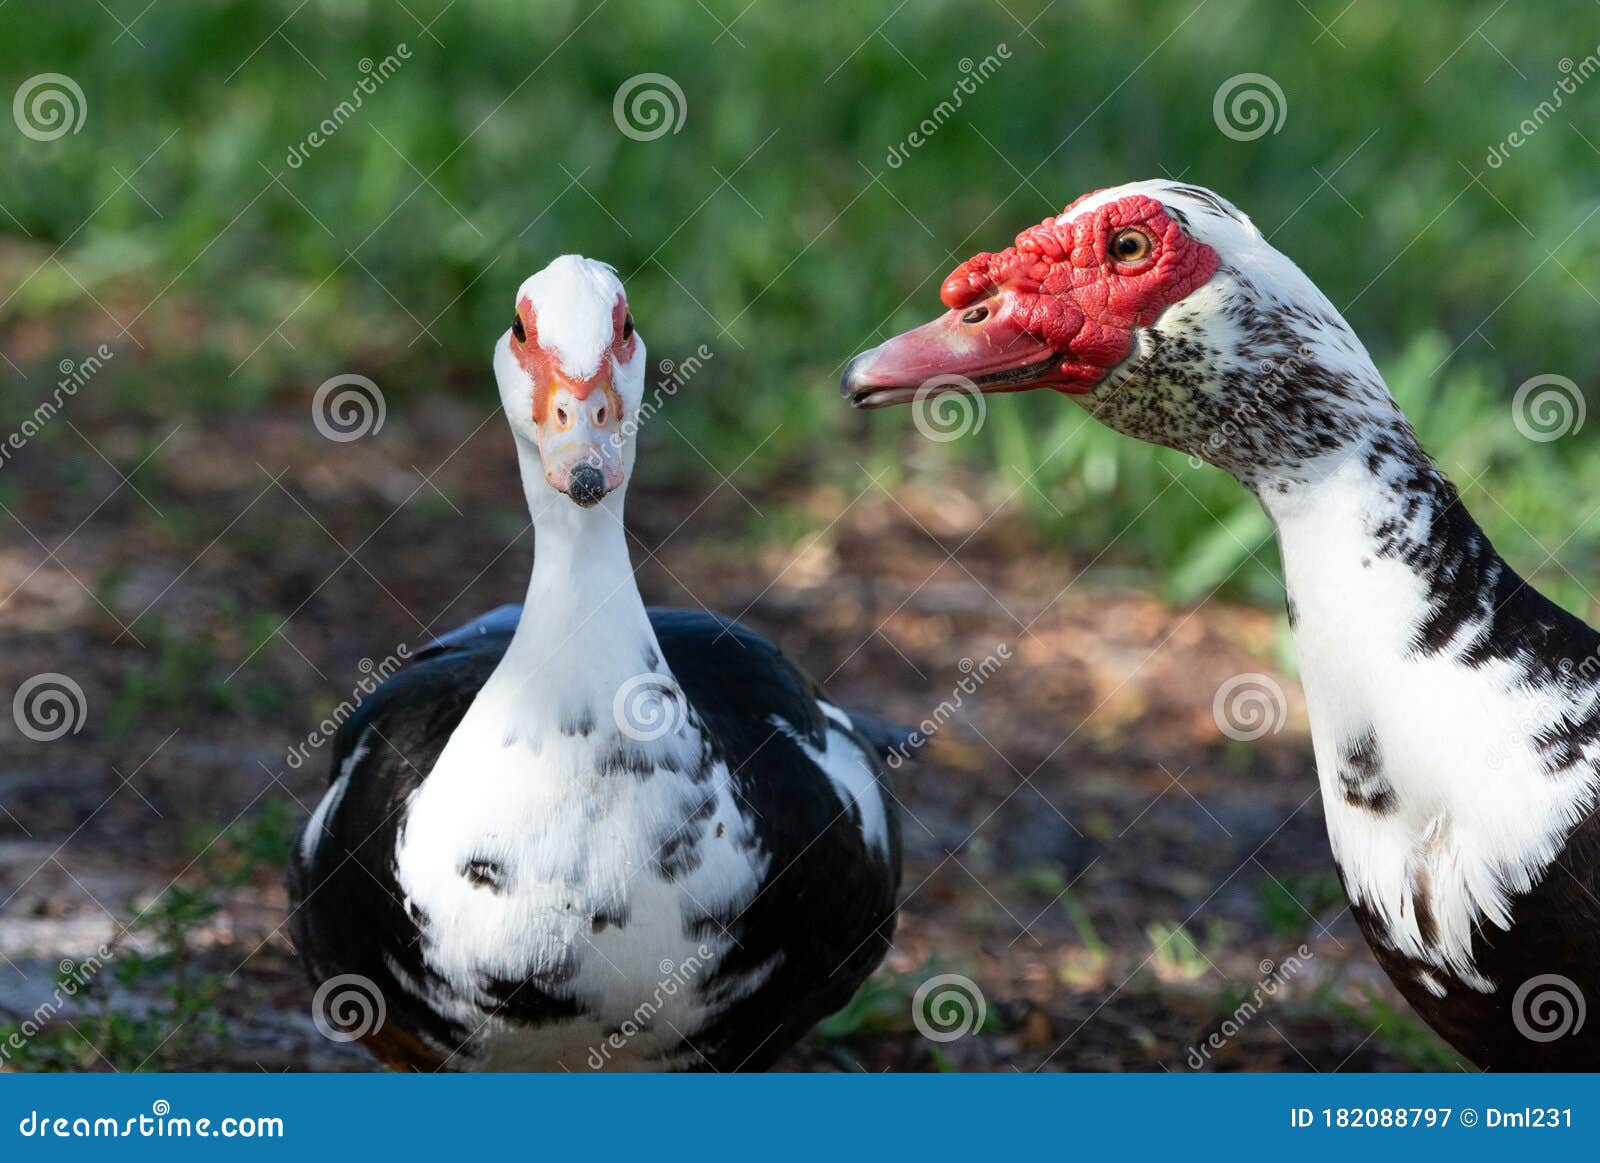 Male and Female Muscovy Duck in Relationship Stock Image - Image of grass,  duck: 182088797